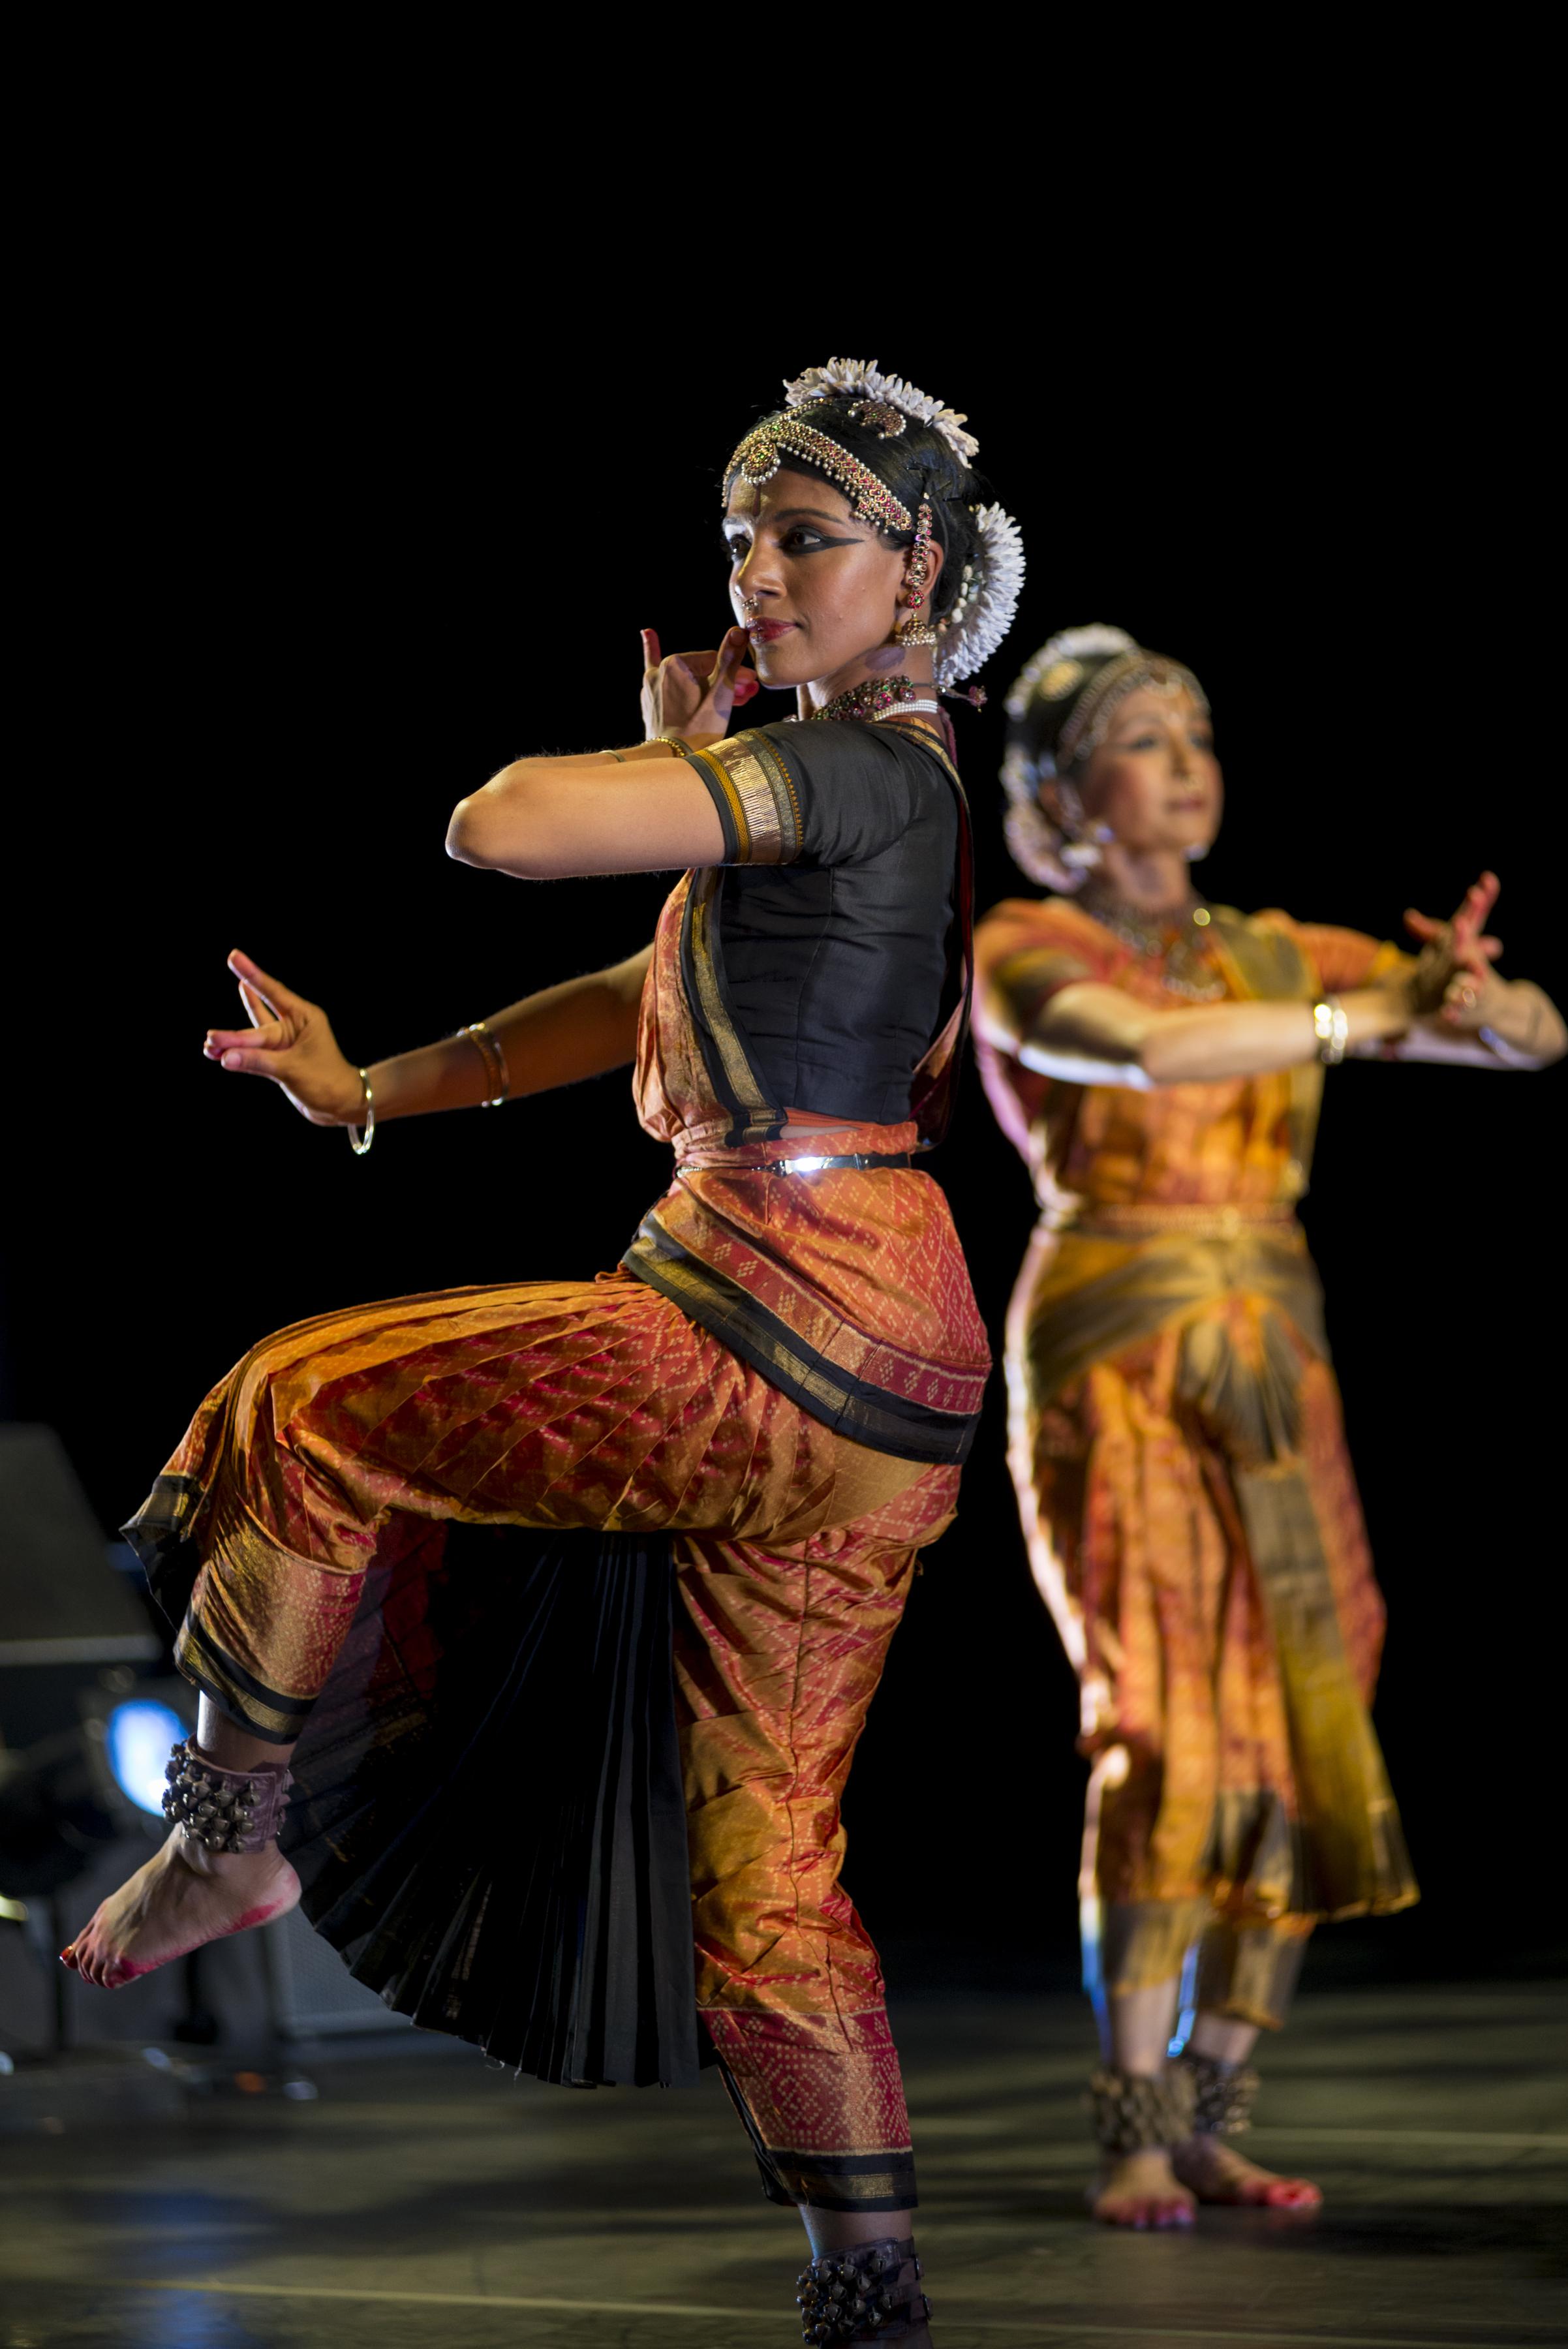 Two women wearing Indian saris, head pieces, and jewelry, dance on stage with fingers flexed and arms and legs bent. They wear rows of bells on their ankles.